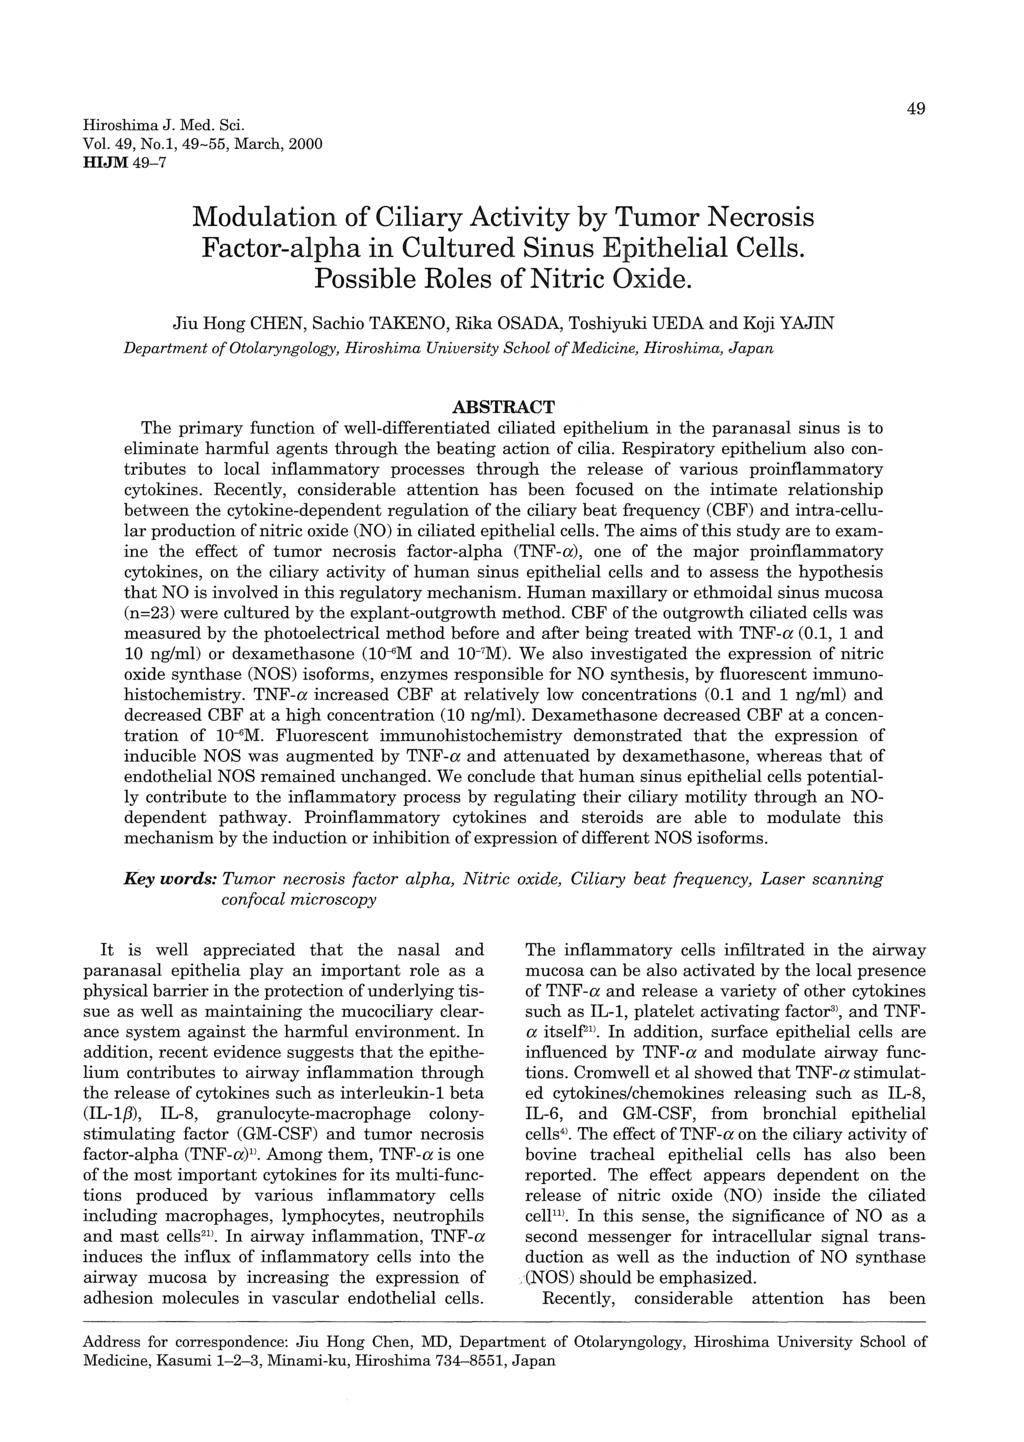 Hiroshima J. Med. Sci. Vol. 49, No.1, 49-55, March, 2000 HIJM49-7 49 Modulation of Ciliary Activity by Tumor Necrosis Factor-alpha in Cultured Sinus Epithelial Cells. Possible Roles of Nitric Oxide.